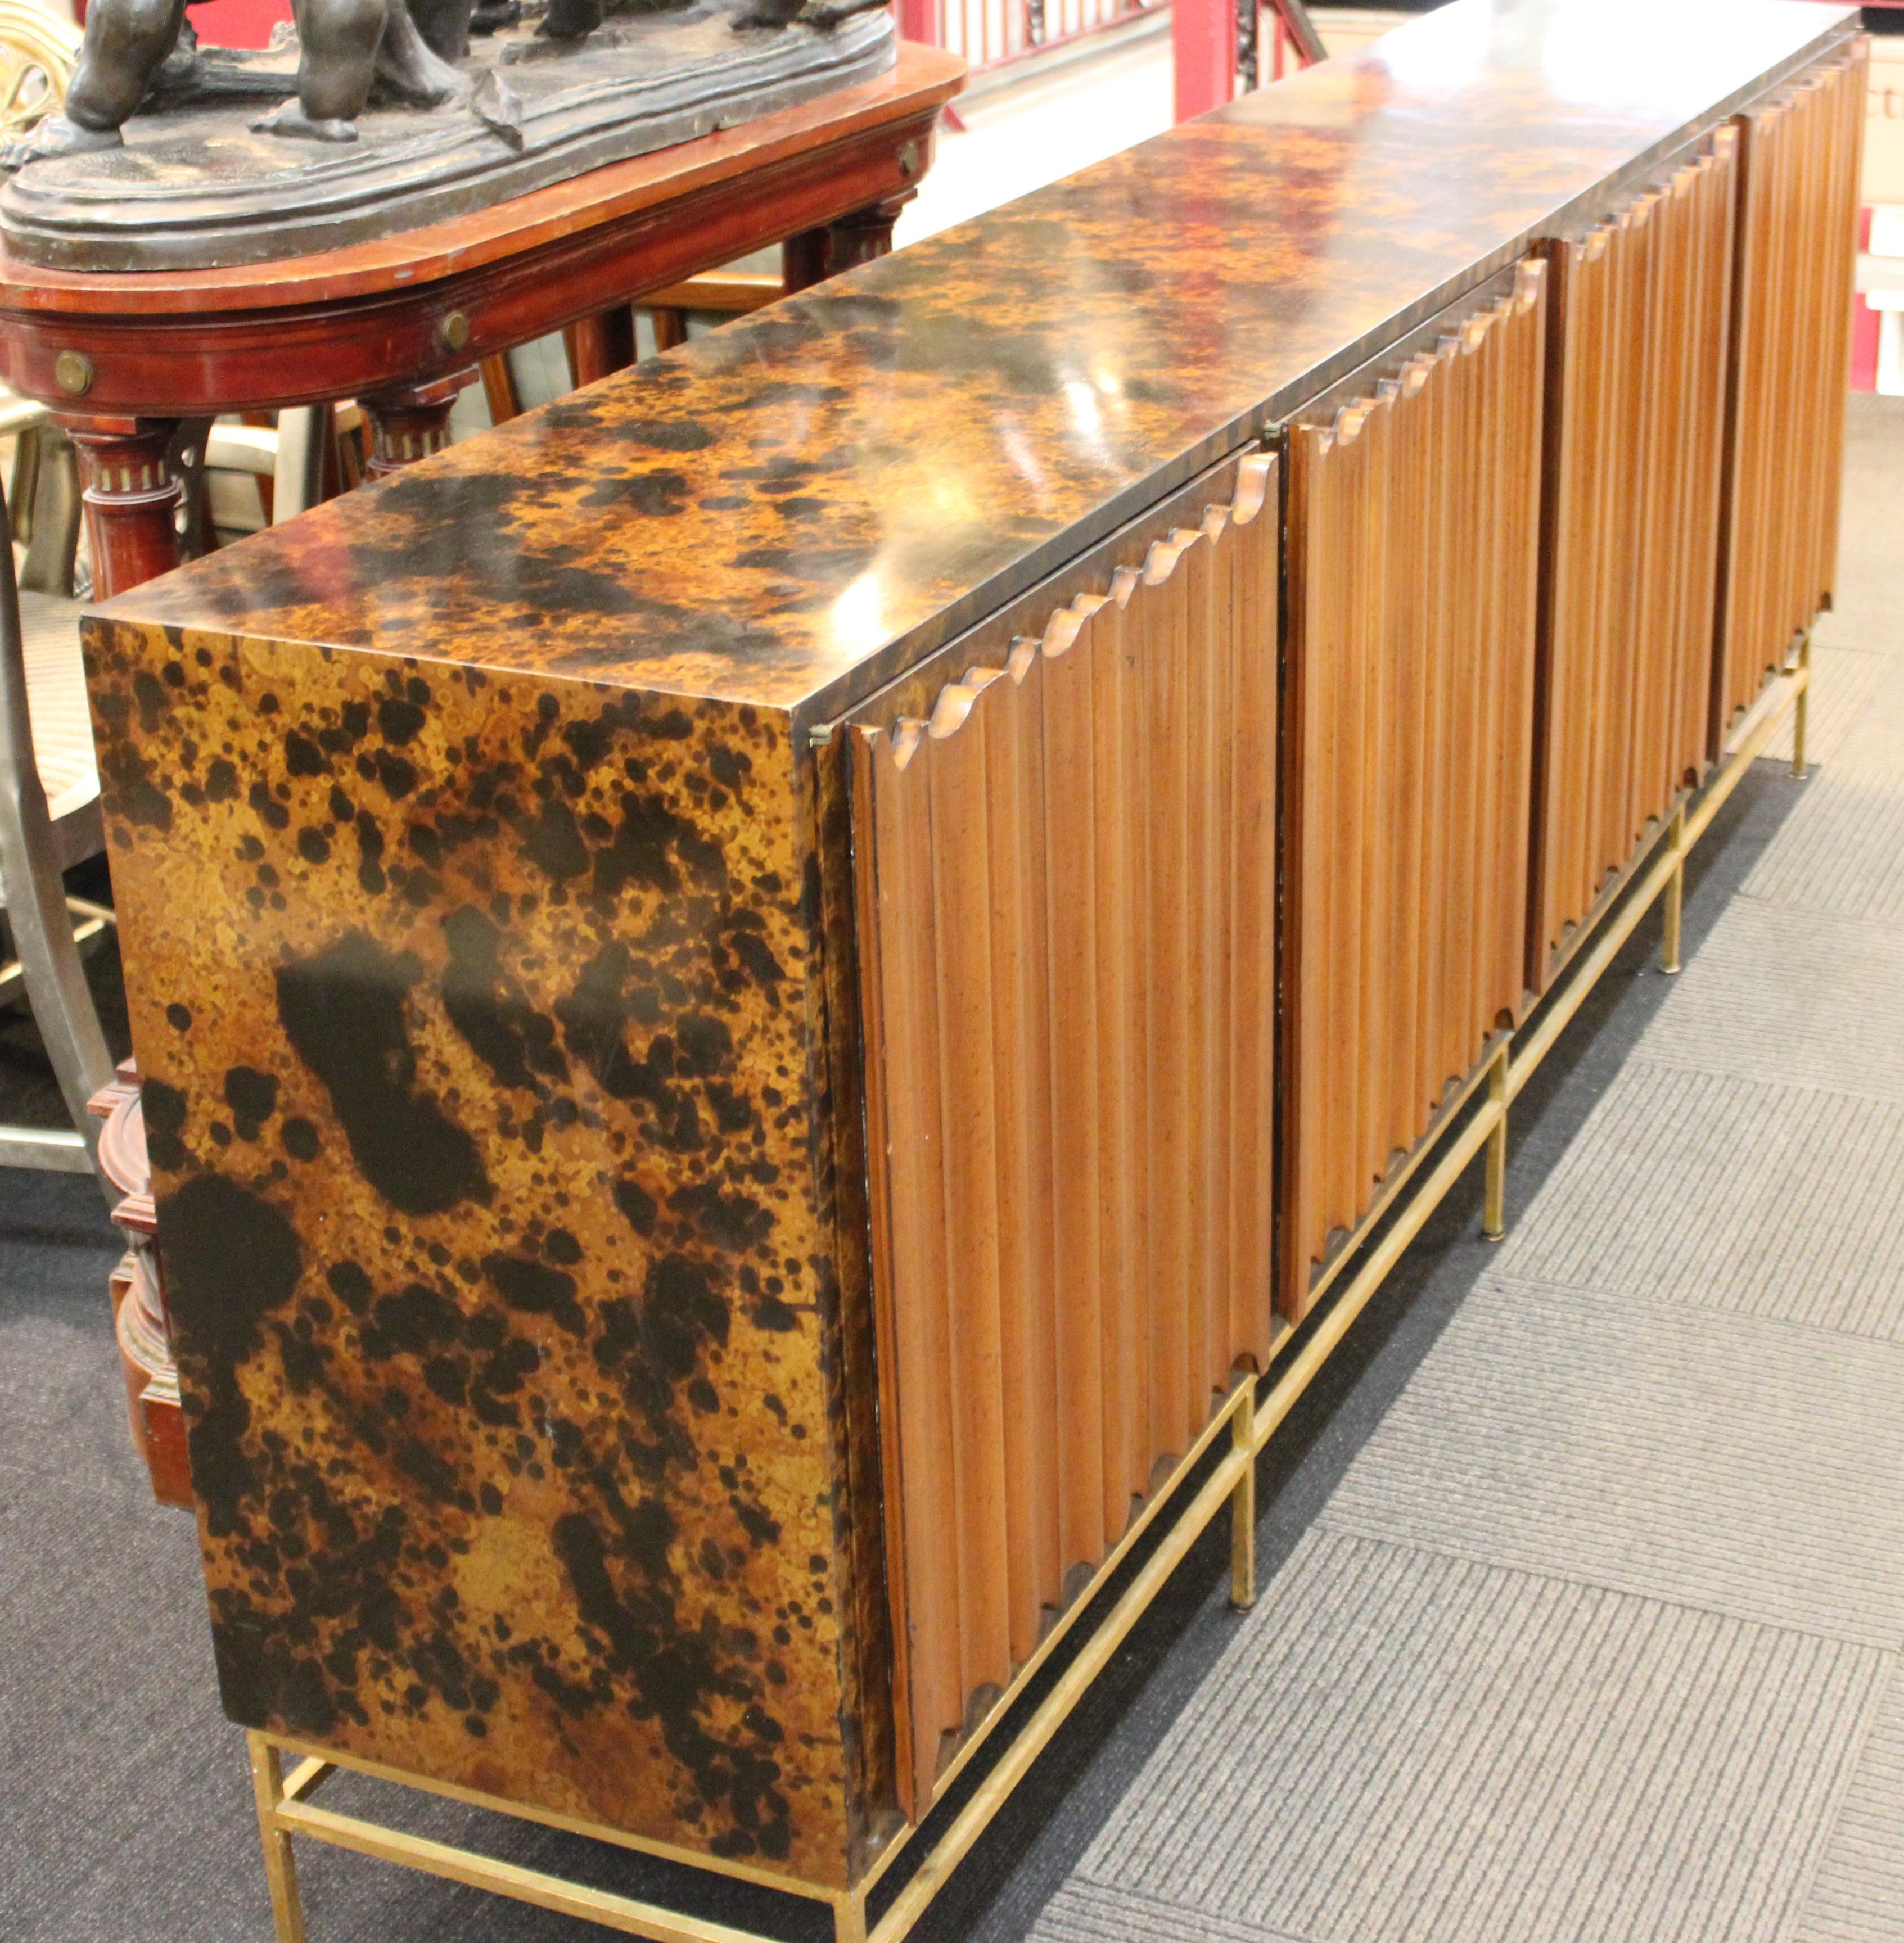 American Mid-Century Modern Probber Style Credenza with Tortoiseshell Finish